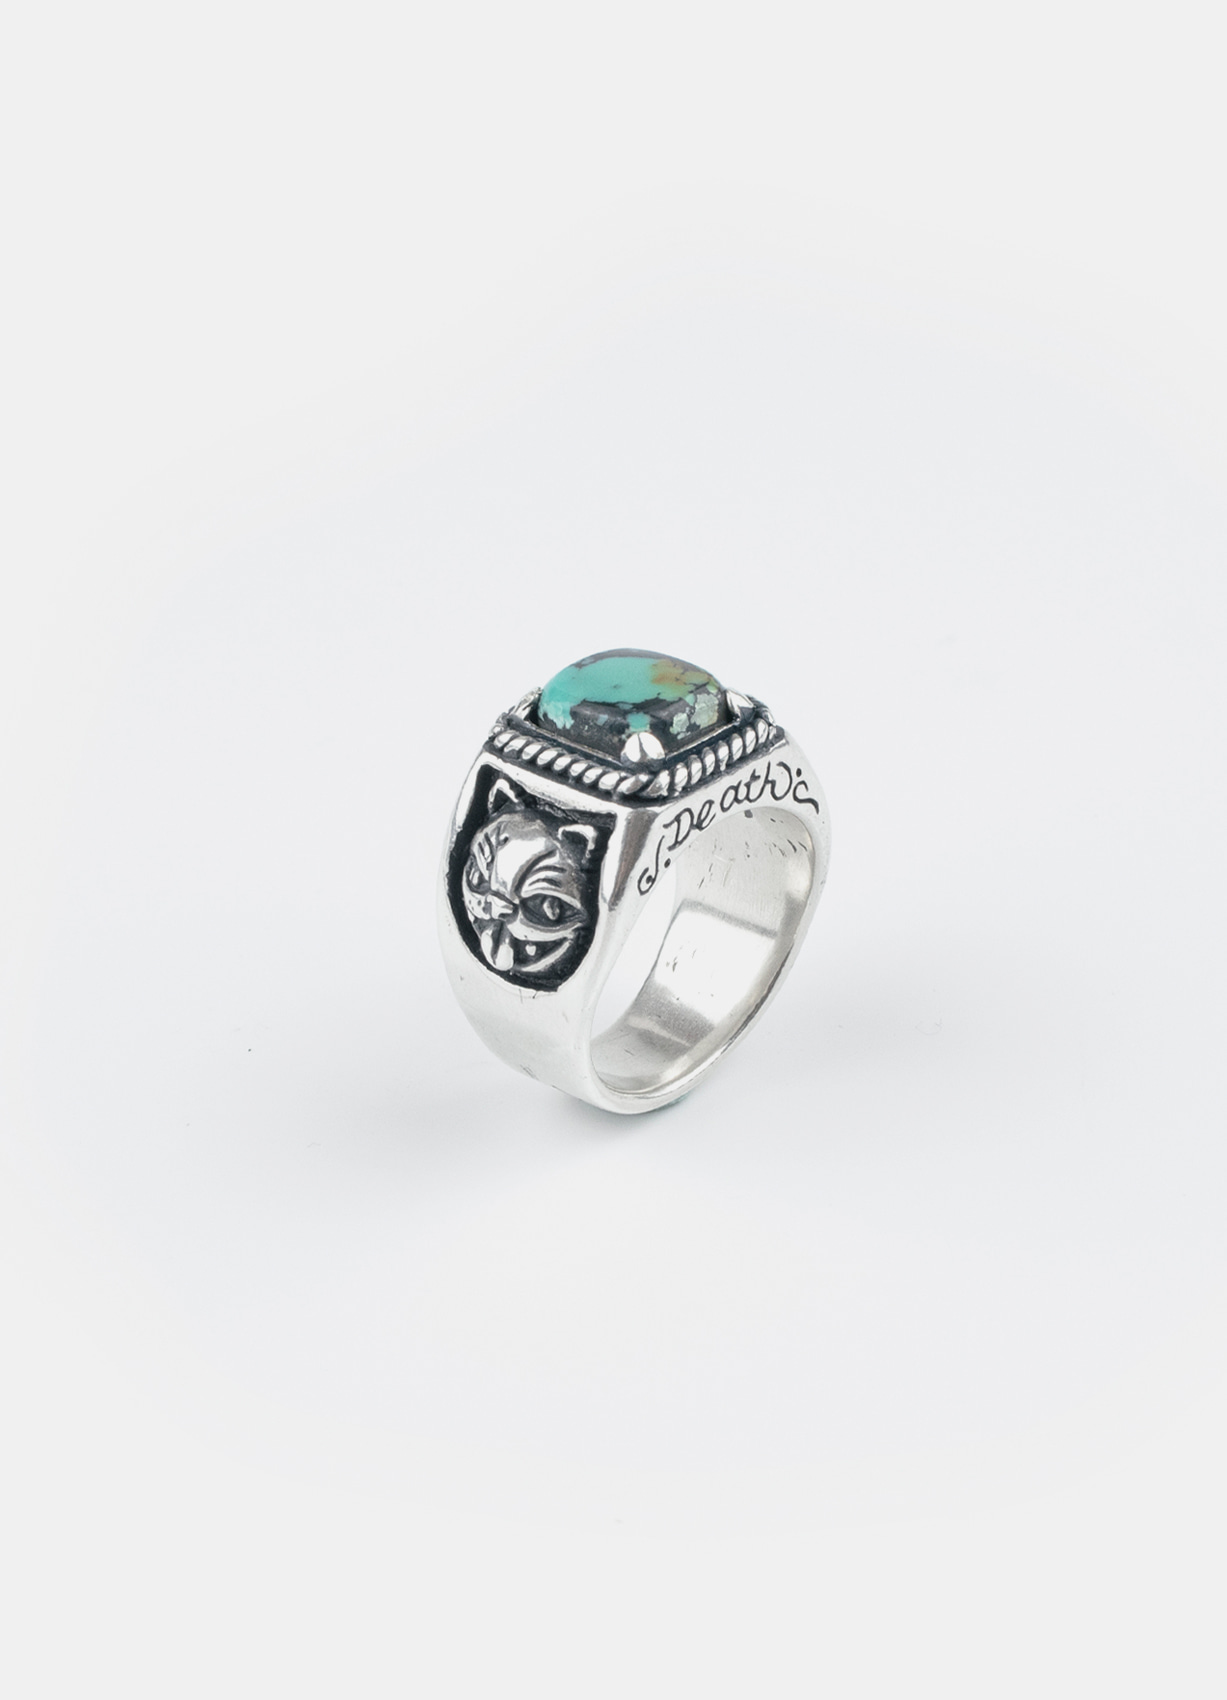 Crazy Cat Turquoise Silver Ring